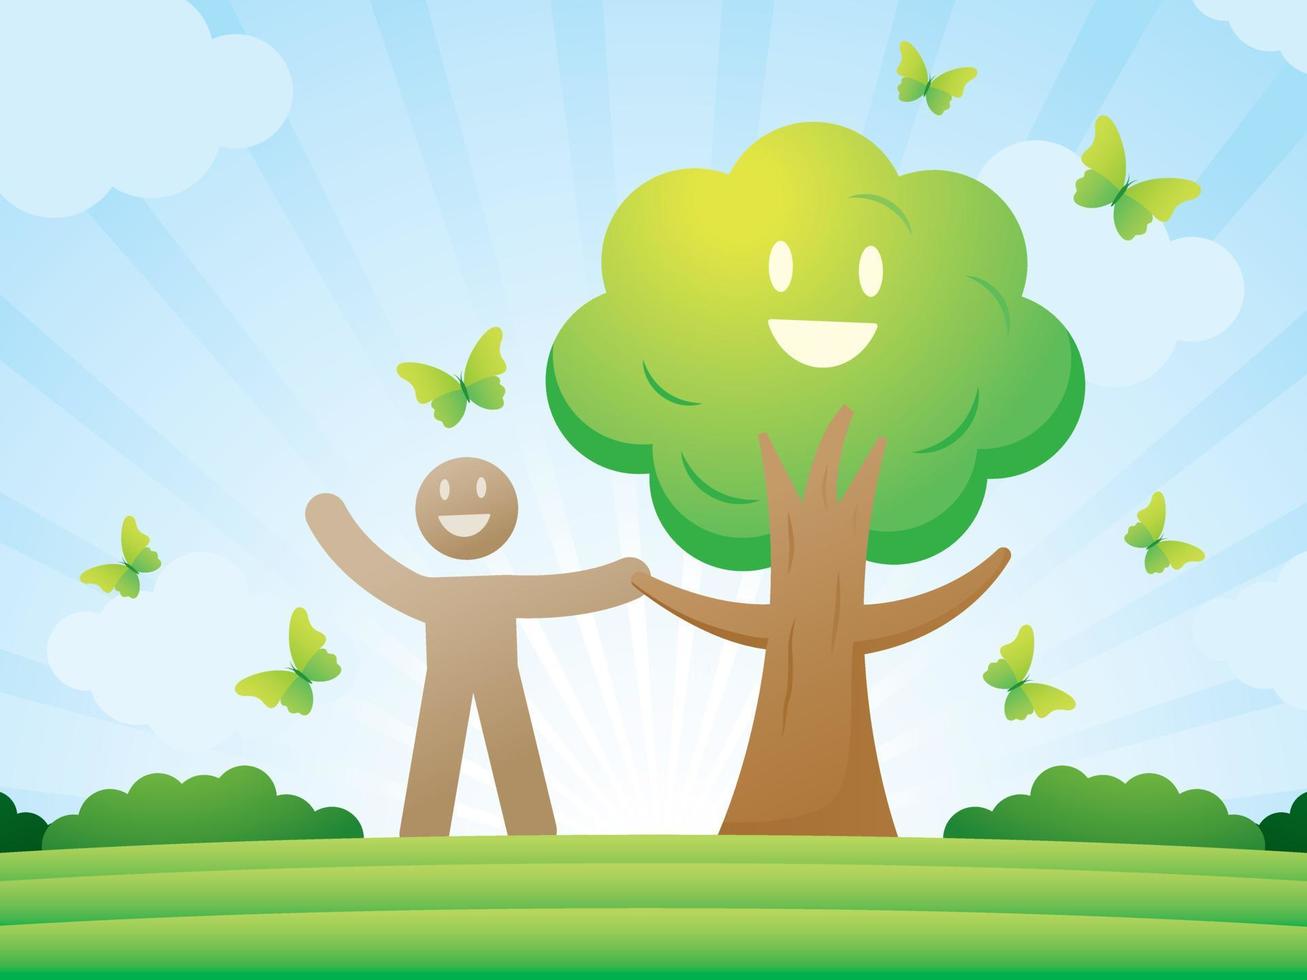 Illustration vector of human join hands with nature to win together.